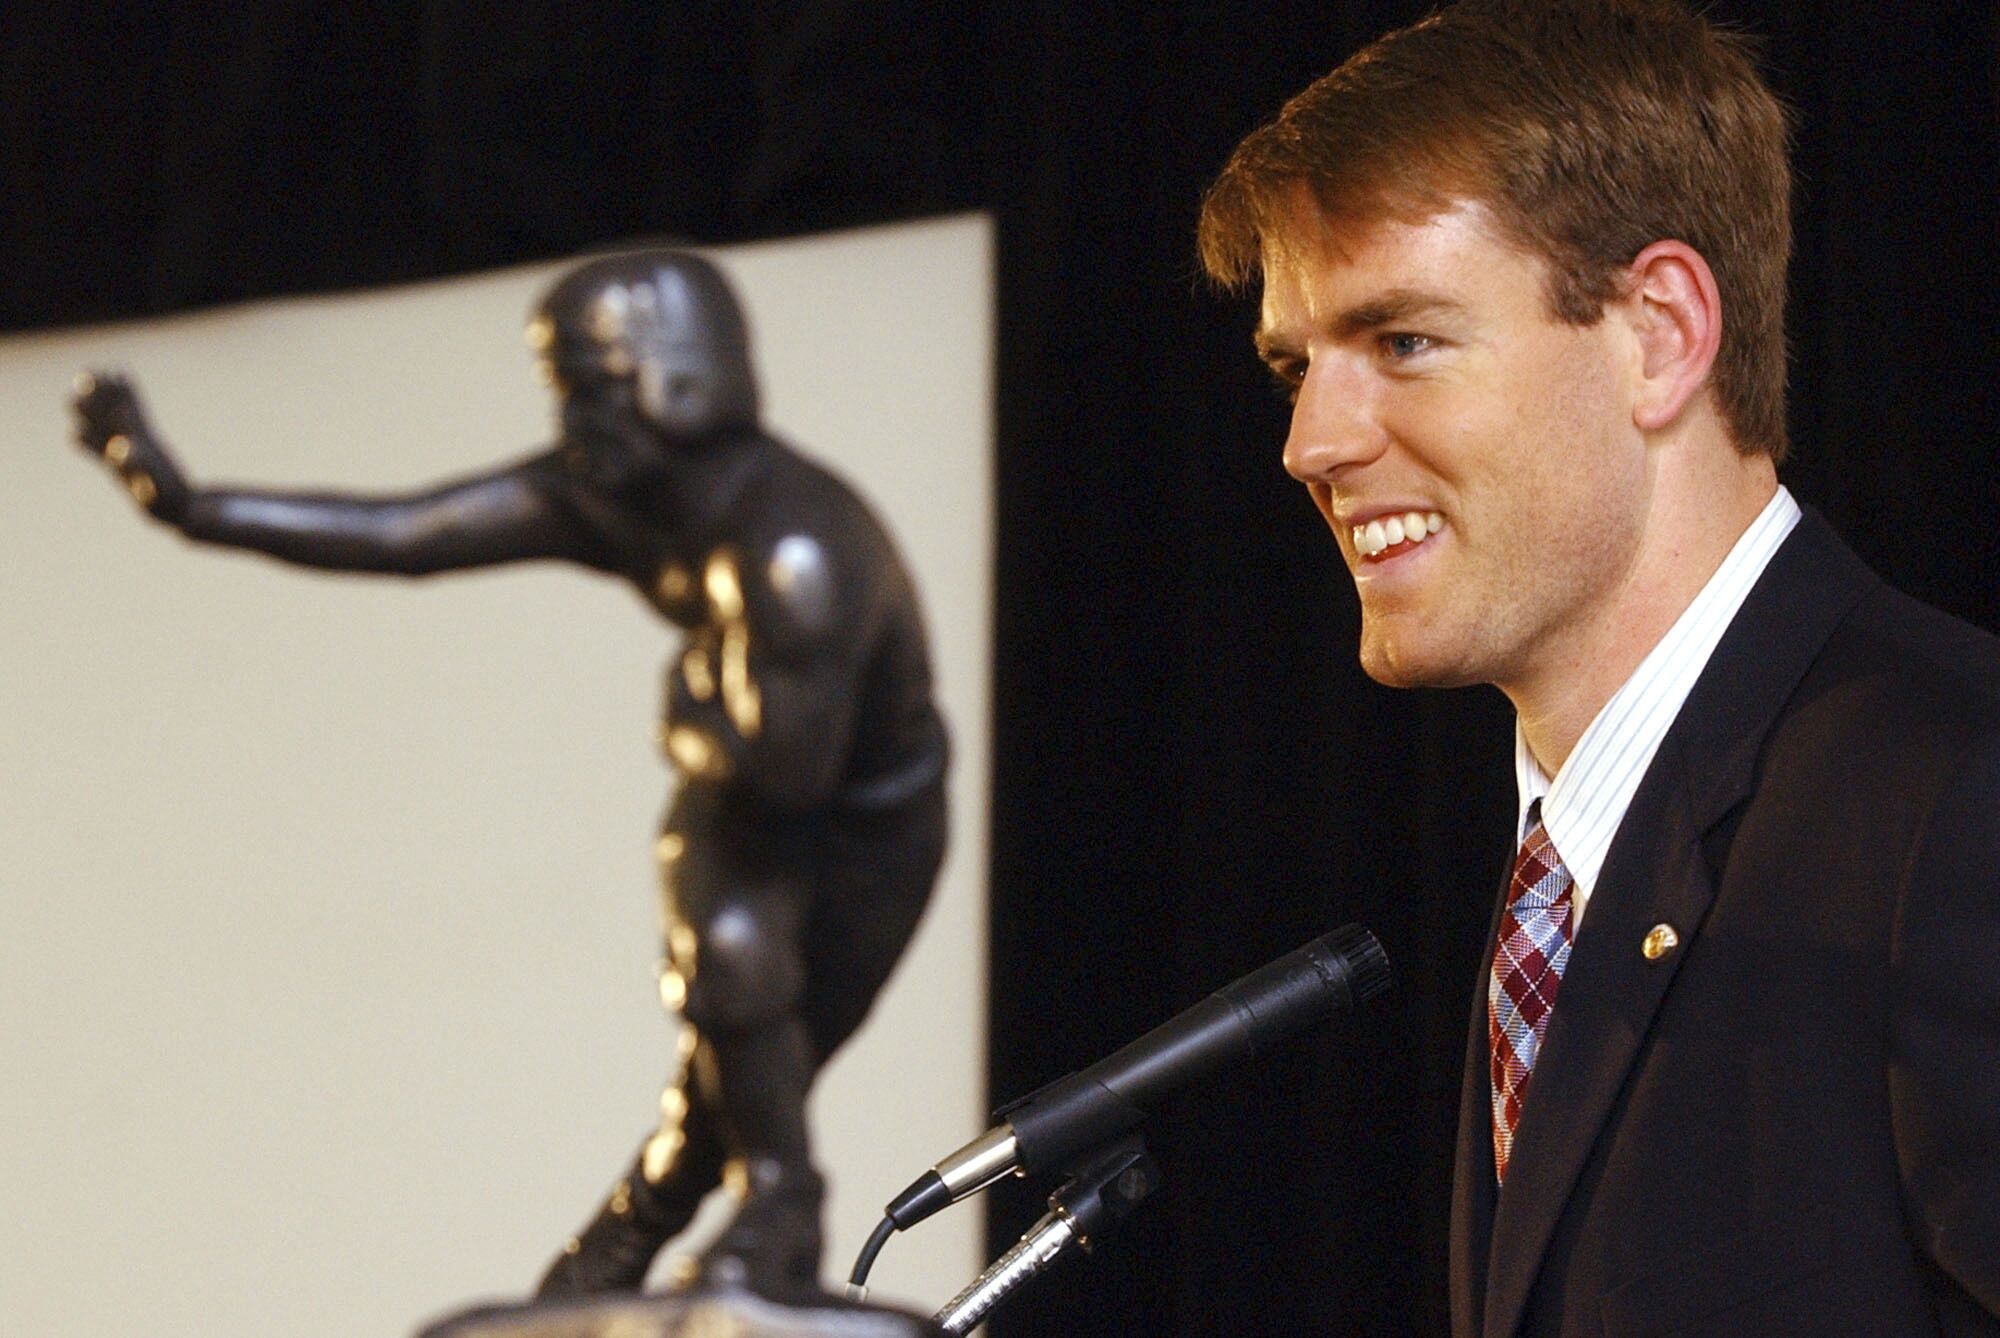 USC quarterback Carson Palmer poses with the Heisman Trophy in New York after winning the award in 2002.